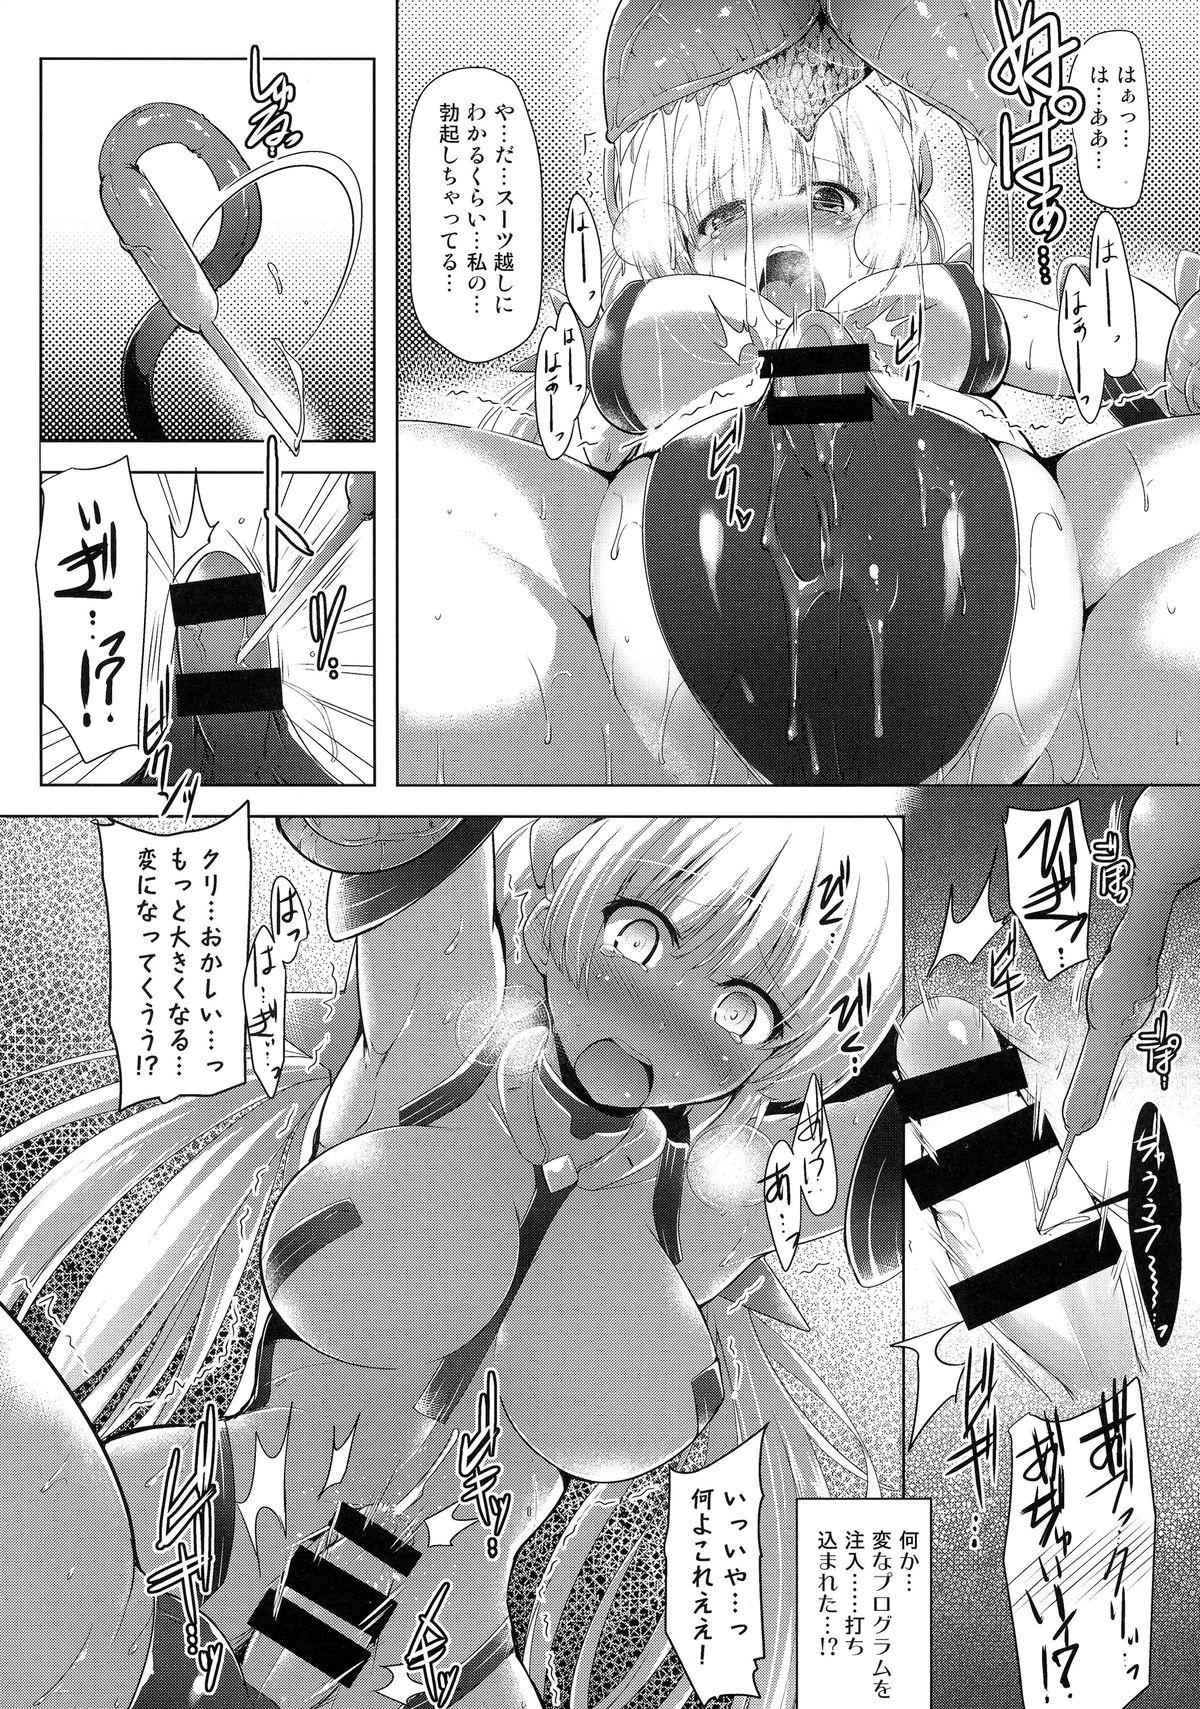 Girl Sucking Dick K.231 - Expelled from paradise Free Rough Porn - Page 8